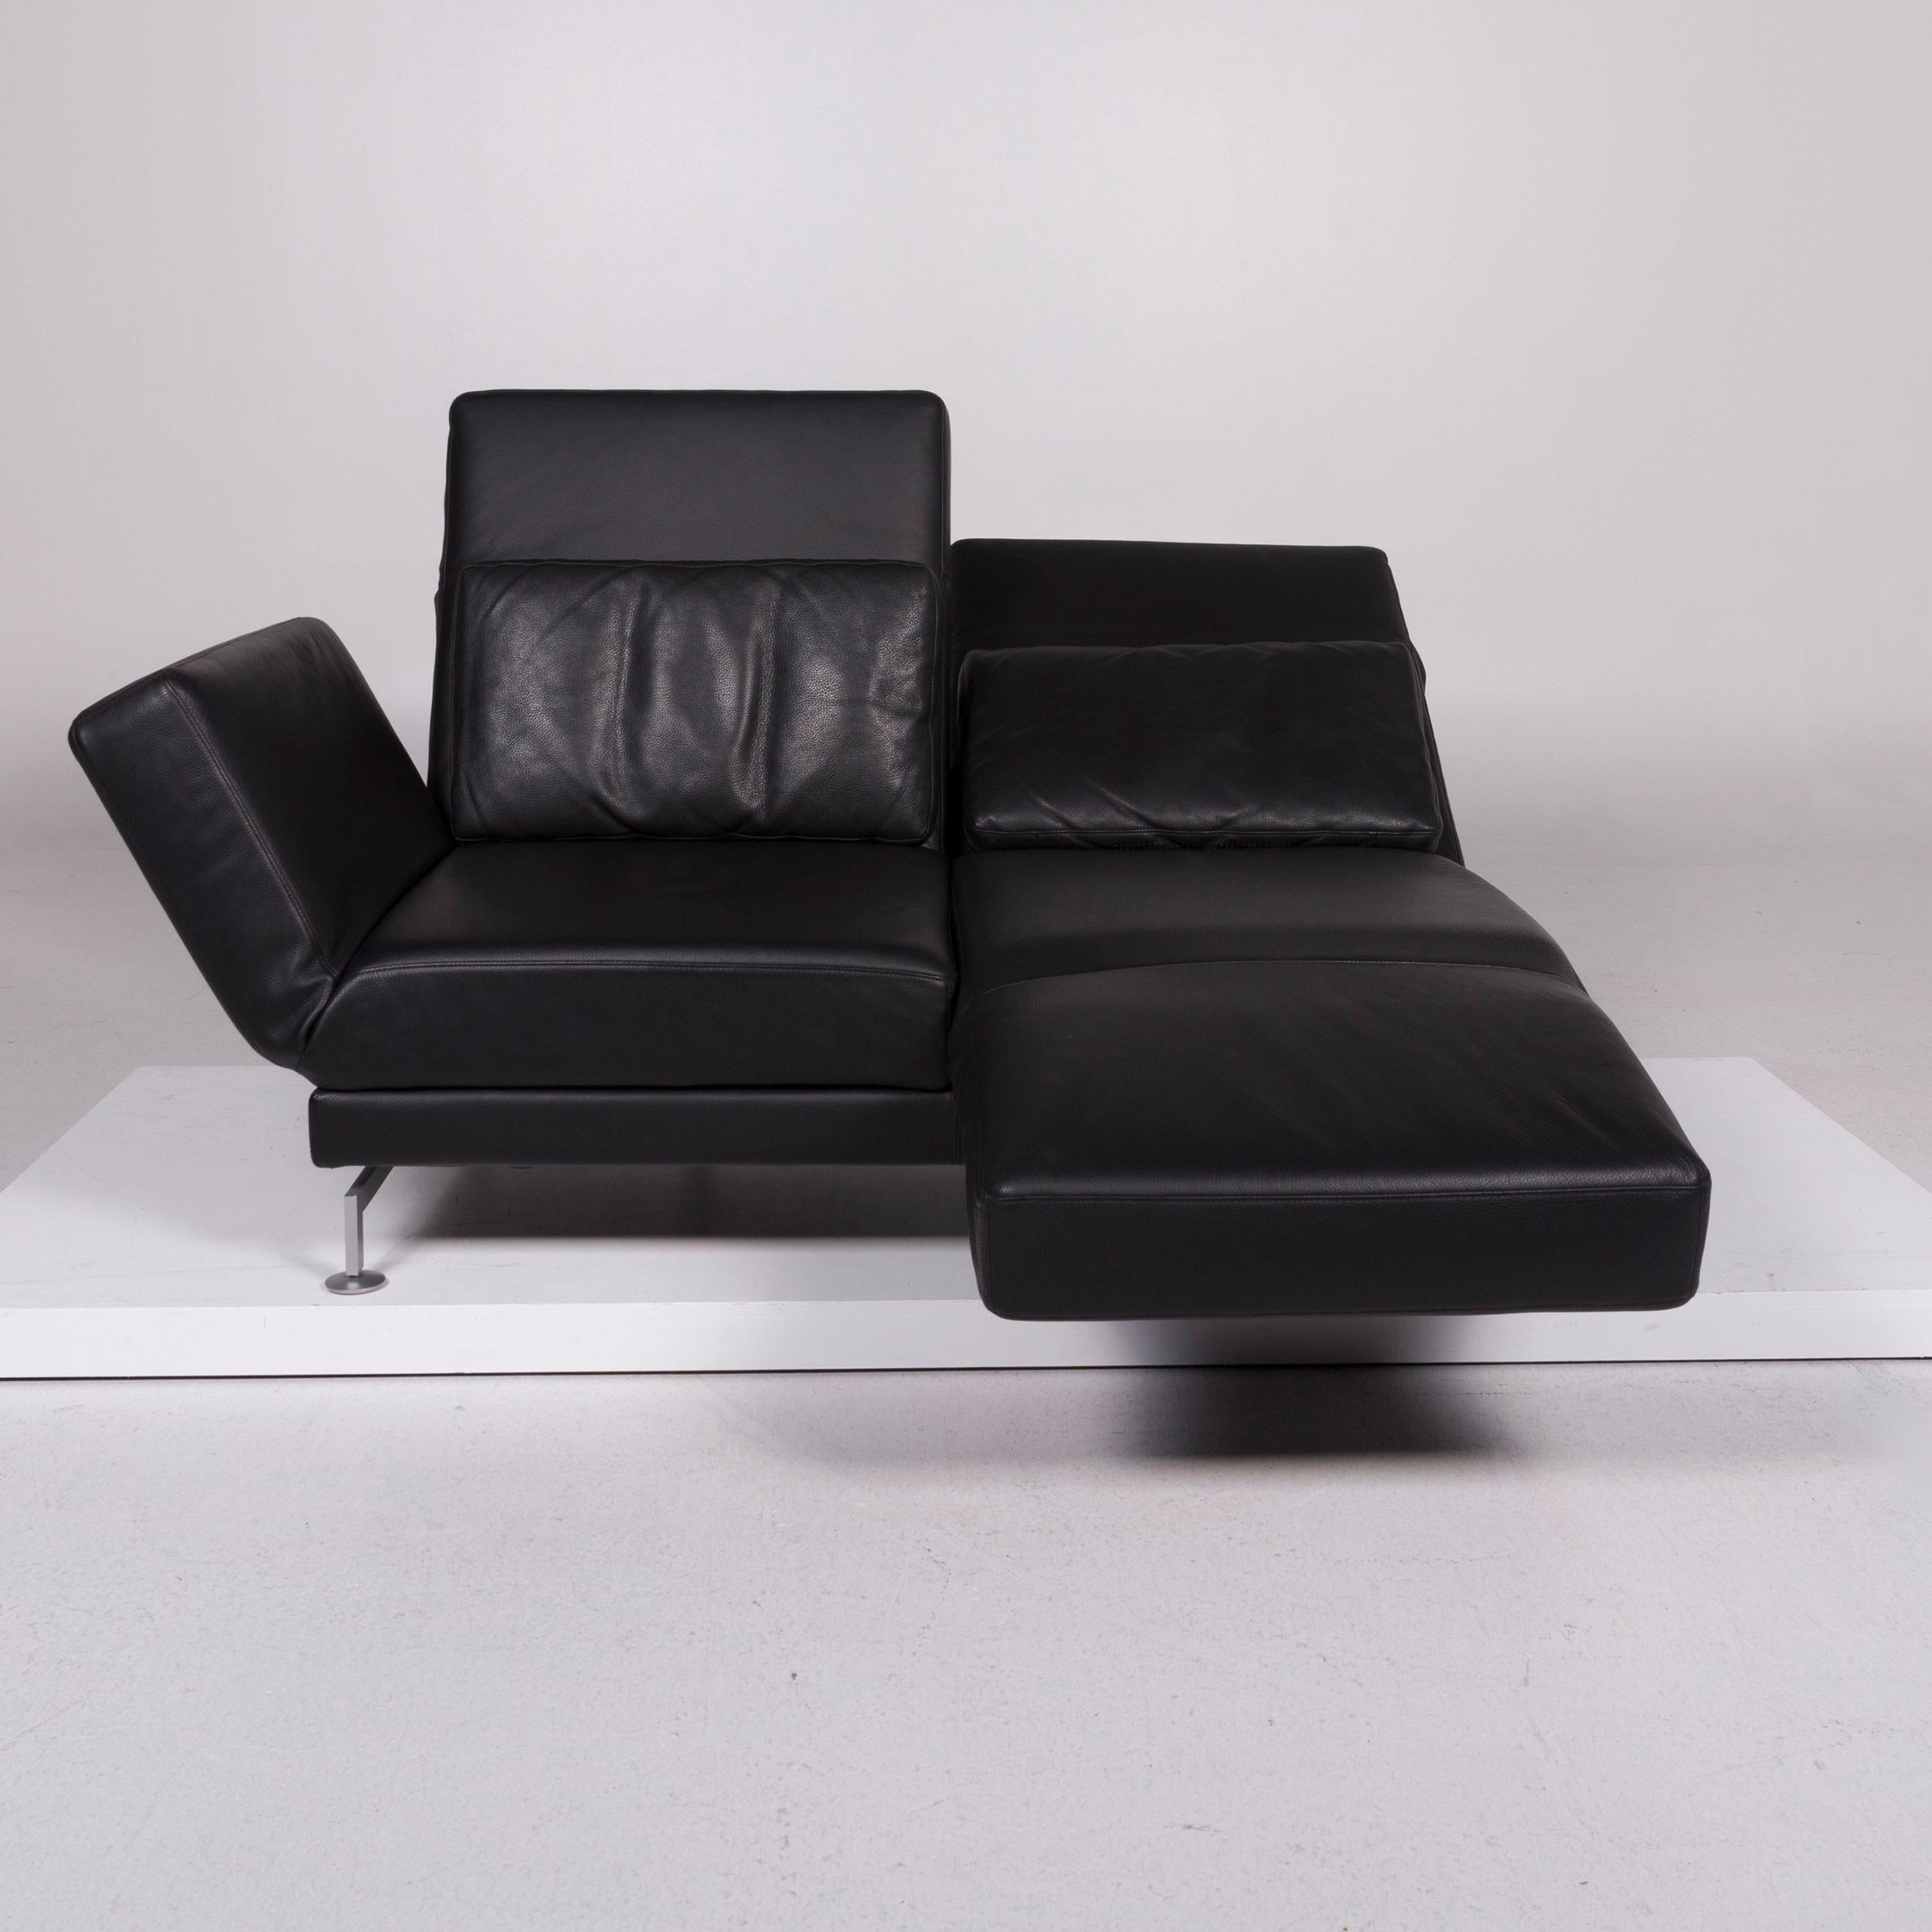 We bring to you a Brühl & Sippold Moule leather sofa black two-seat.


 Product measurements in centimeters:
 

Depth 95
Width 183
Height 104
Seat-height 40
Rest-height 40
Seat-depth 55
Seat-width 140
Back-height 70.
 